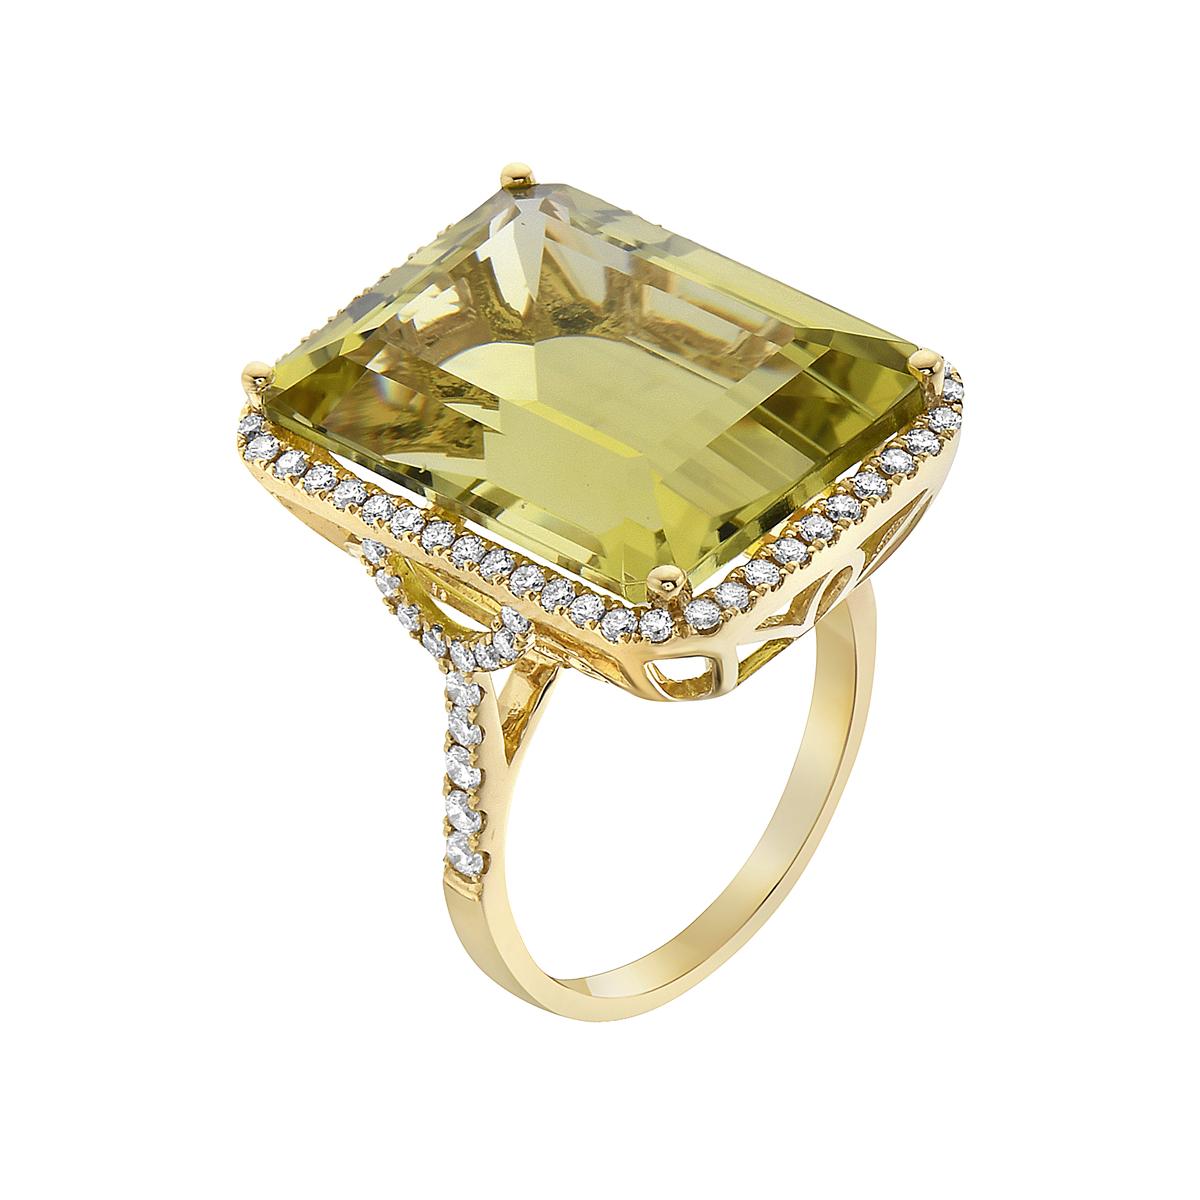 With this exquisite semi-precious gold green quartz ring , style and glamour are in the spotlight. This 14-karat emerald cut ring is made from 5.7  grams of gold, 1 green quartz totaling 21.46 karats, and is surrounded by 76 round SI1-SI2, GH color